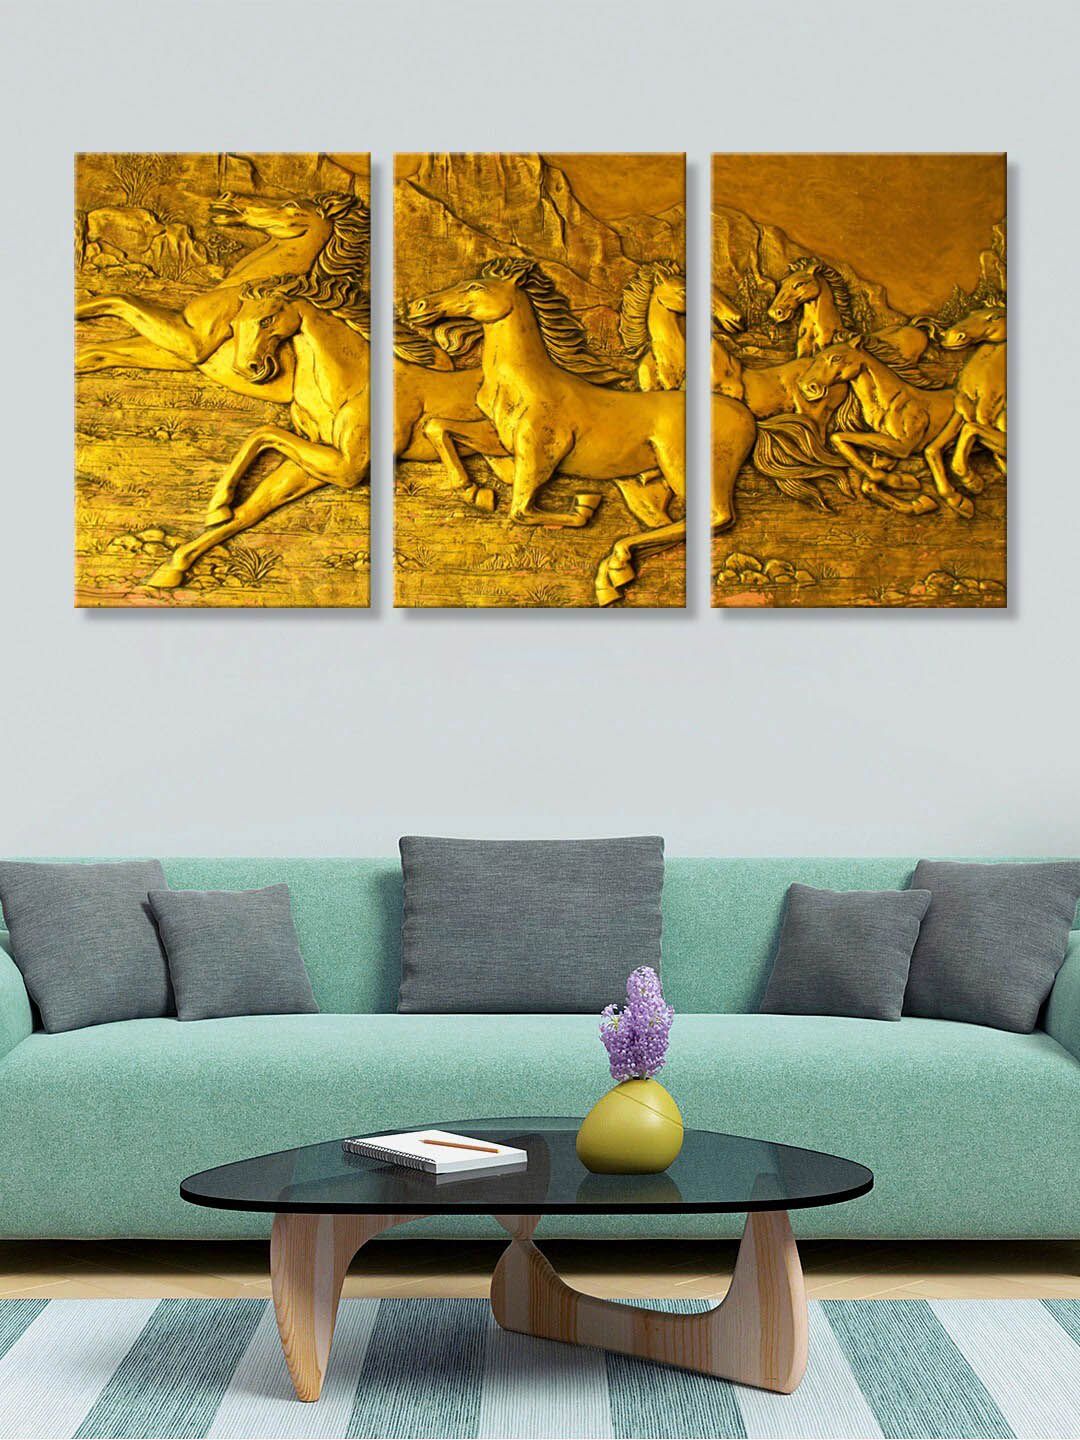 999Store Set of 3 Gold-Coloured Running Horse Canvas Wall Art Price in India